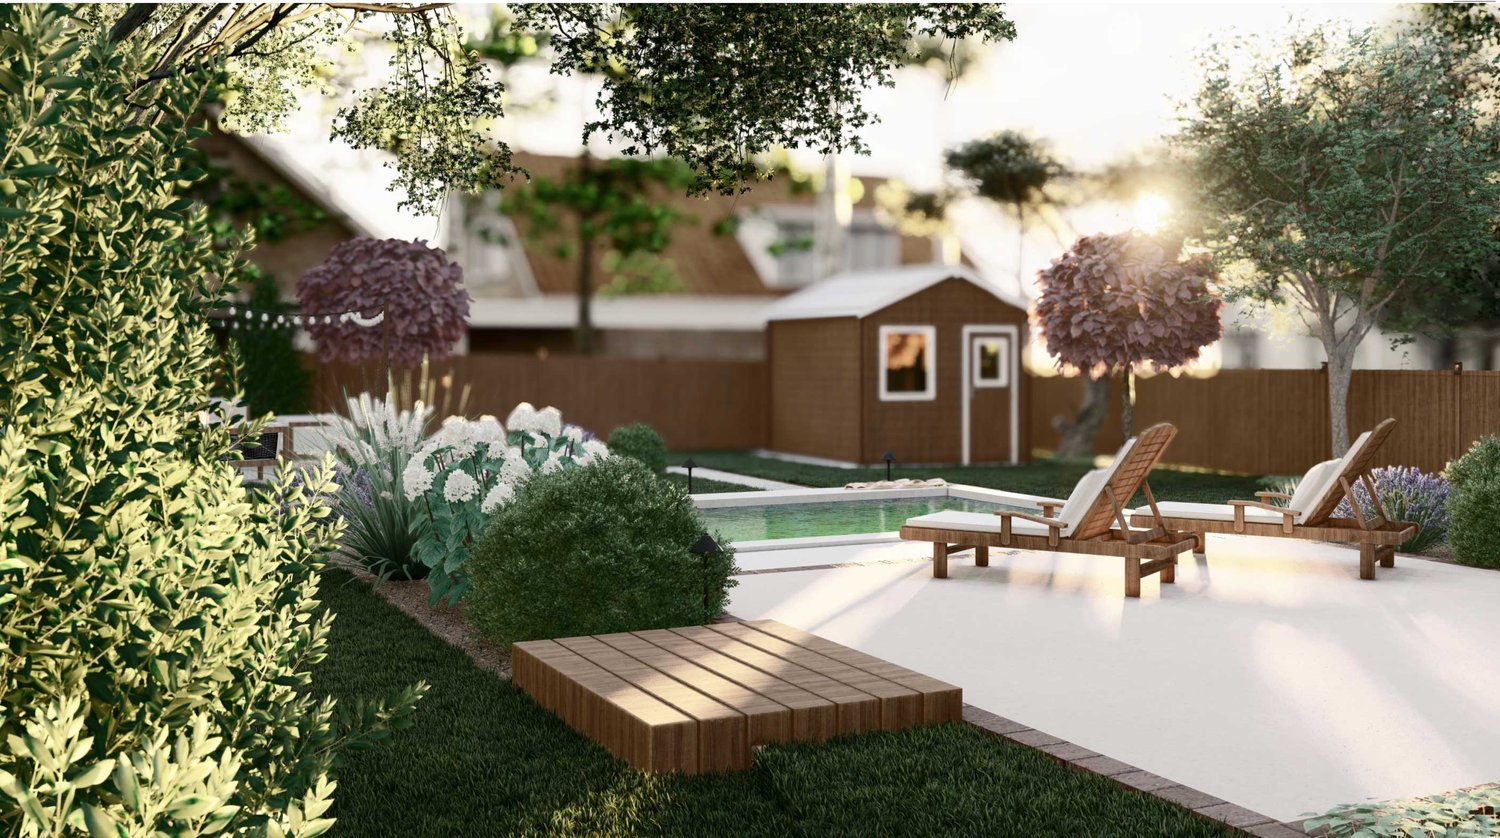 Arlington backyard pool area with outdoor chaise lounges on concrete, with flower surroundings